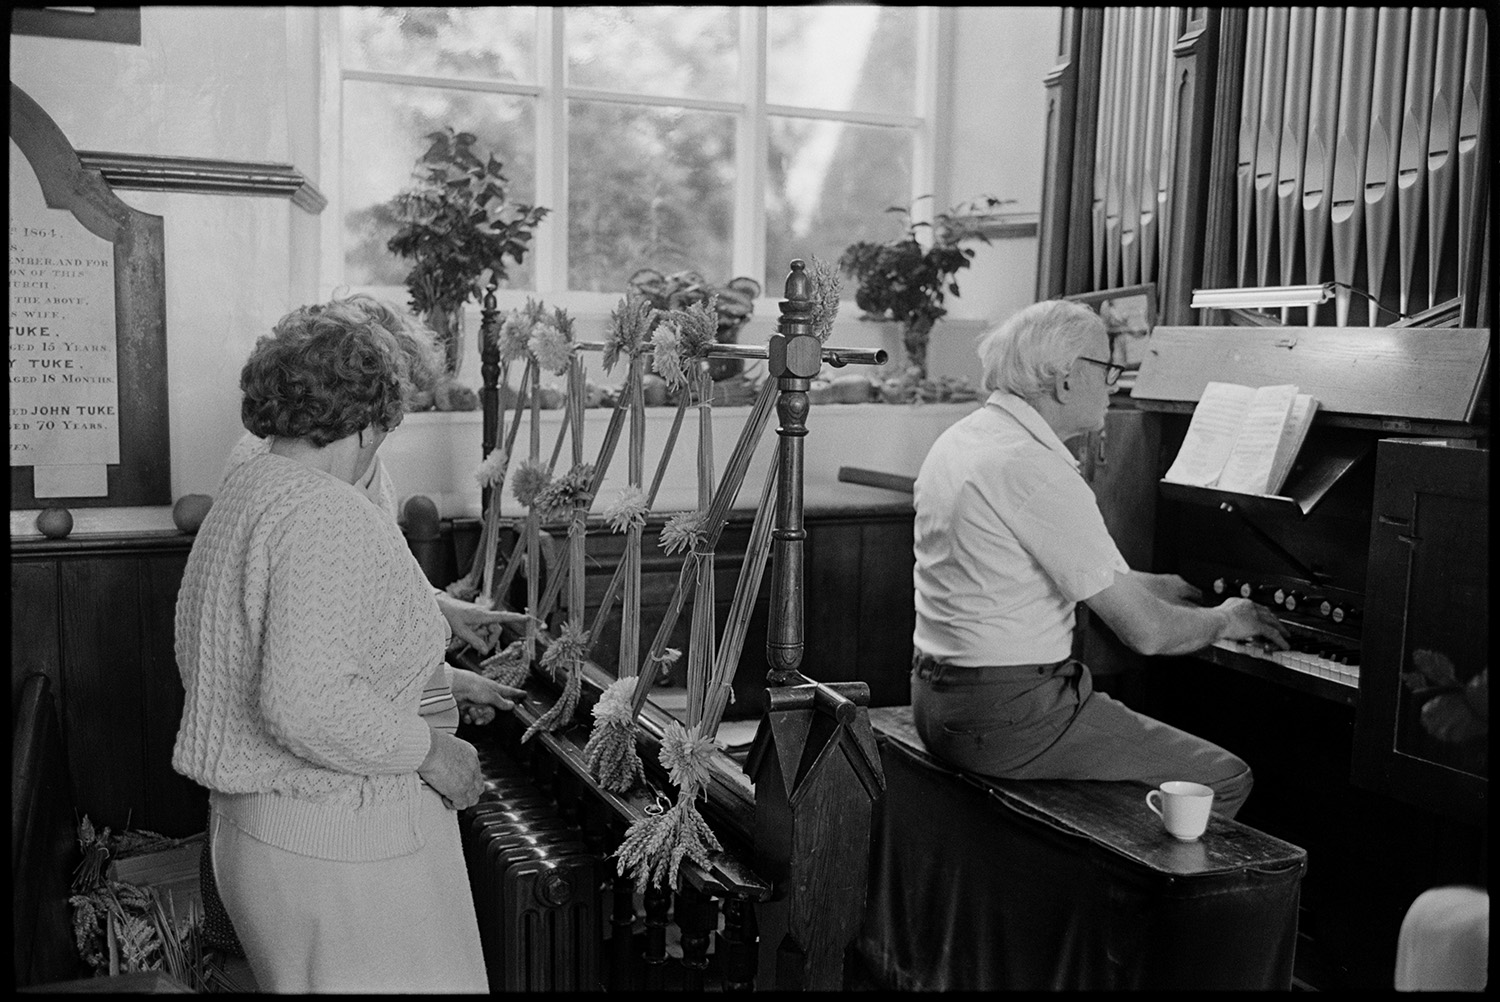 Congregational chapel interior with people decorating for Harvest Festival and having tea. 
[Two women arranging a floral display with sheaves of corn for the Harvest Festival by a man playing the organ at Chulmleigh Congregational Chapel. One of women may be Elaine March, the Minister]